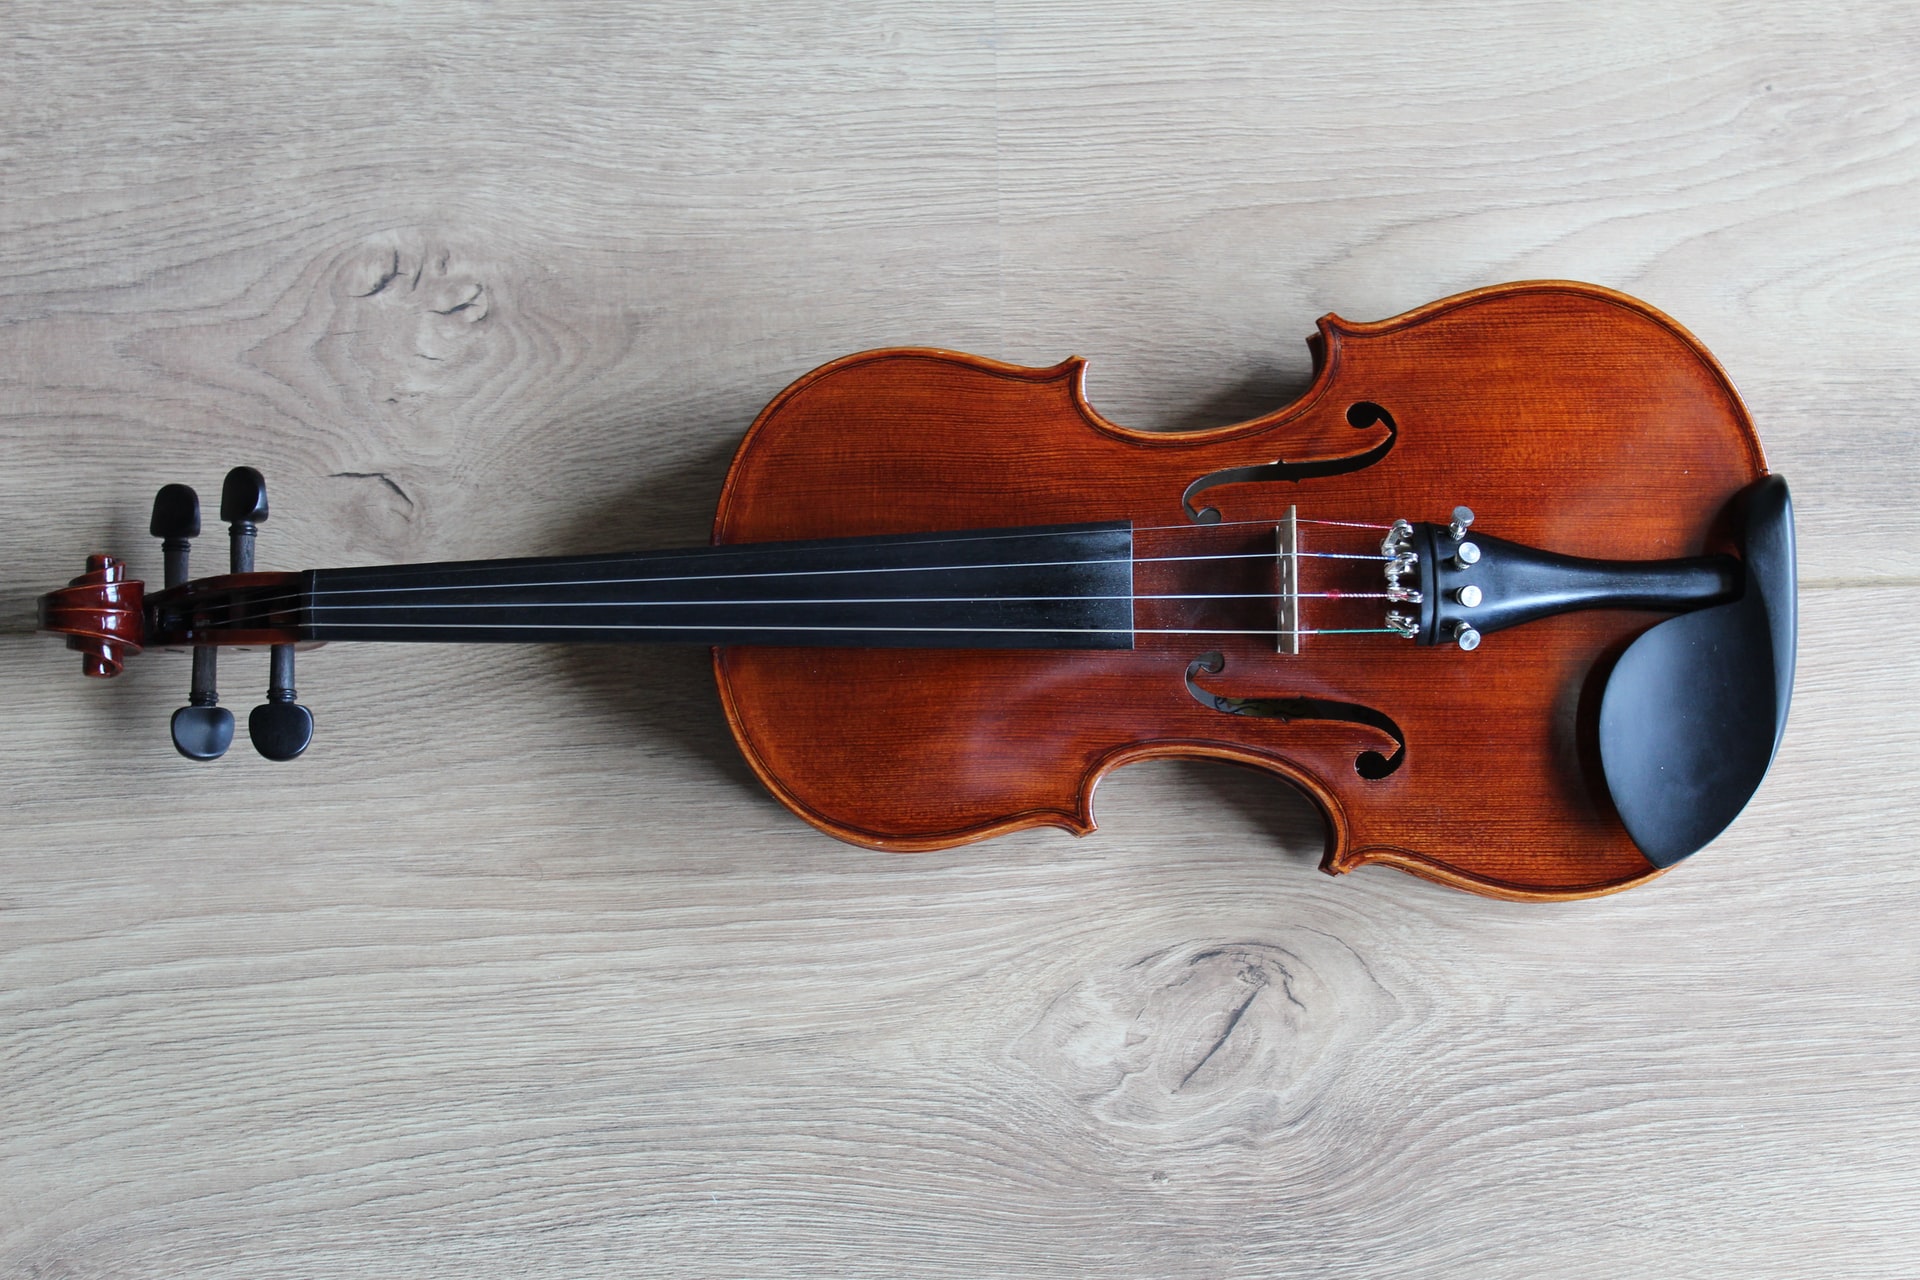 Hd Picture of a beautiful brown violin in a gray surface